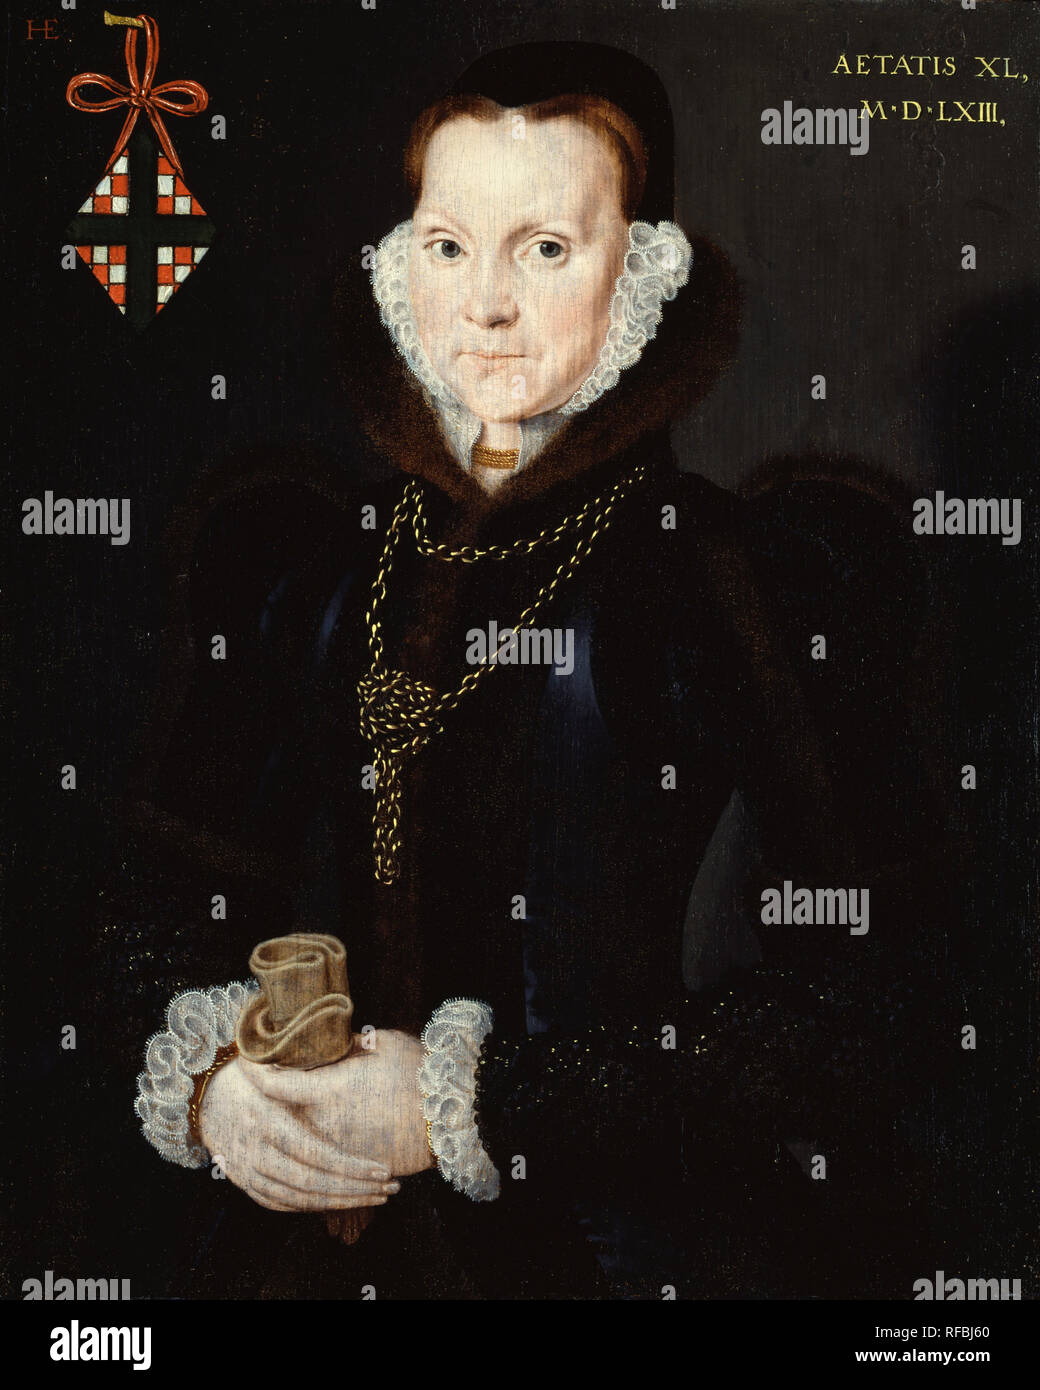 Portrait of Elizabeth Roydon, Lady Golding. Date/Period: 1563. Painting. Oil on panel. Height: 378 mm (14.88 in); Width: 302 mm (11.88 in). Author: Hans Eworth. Stock Photo